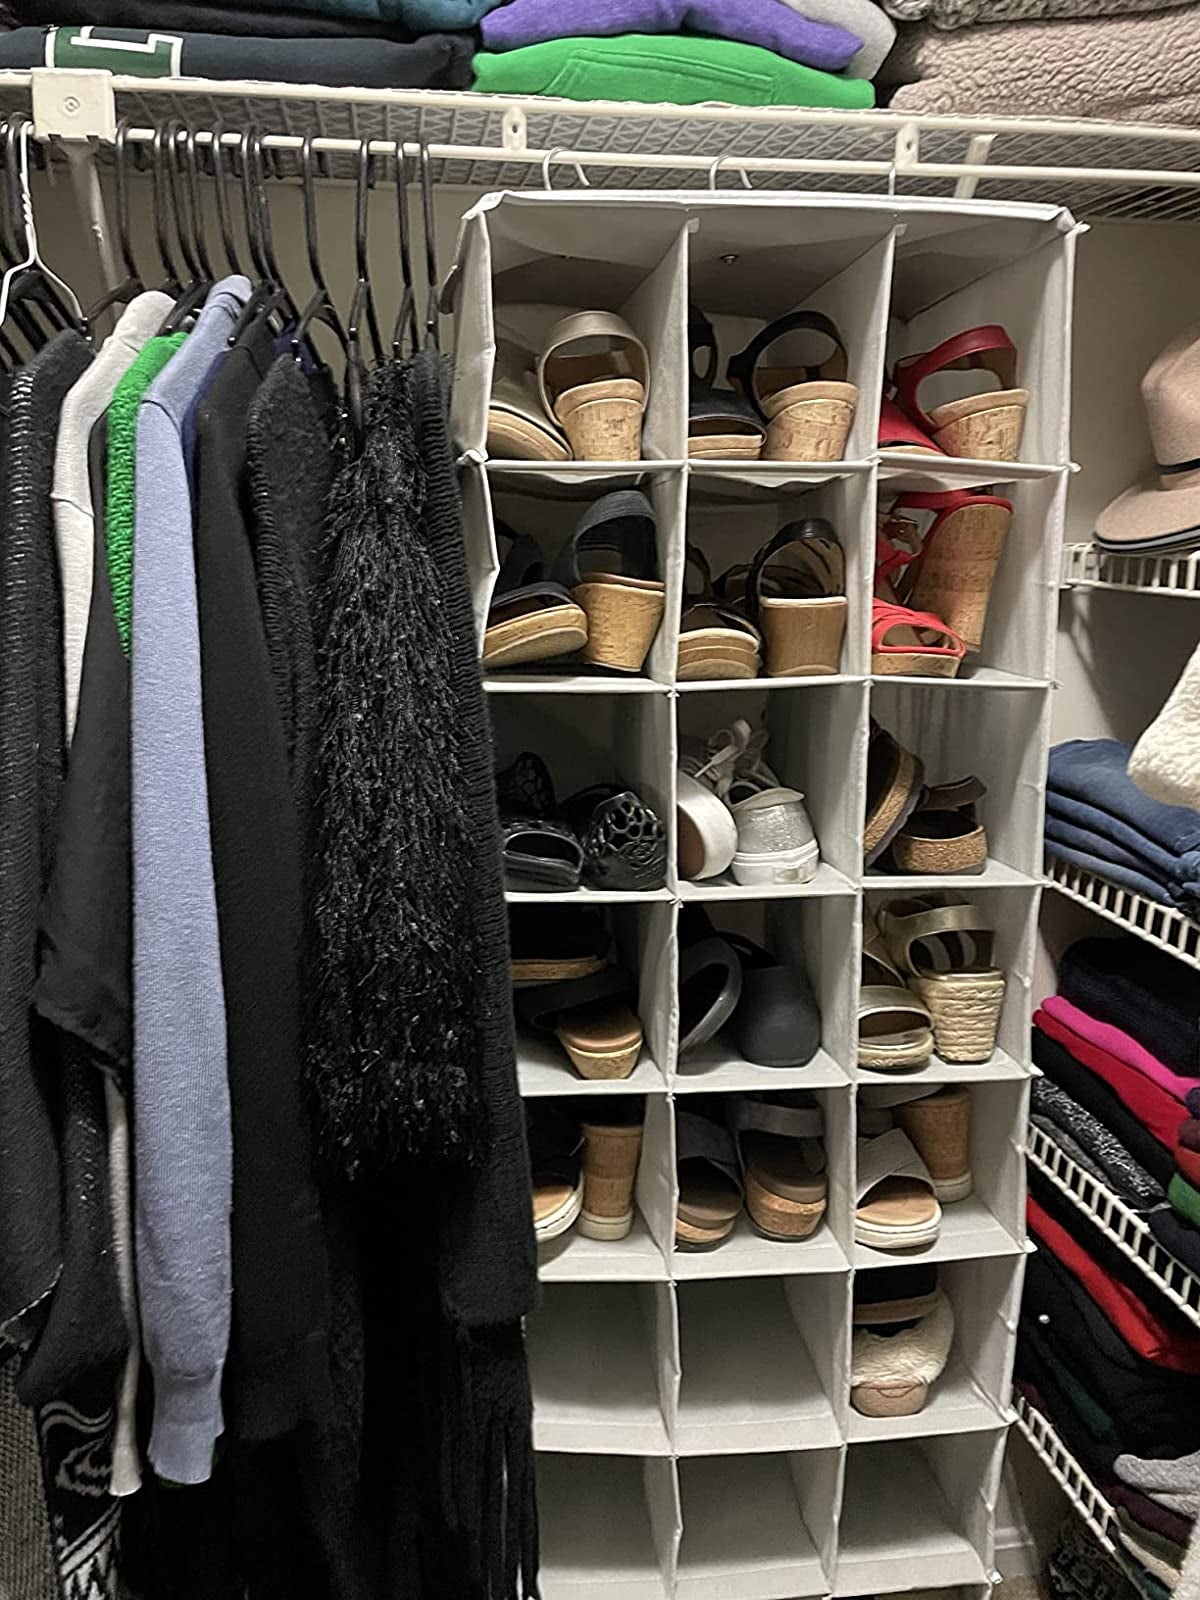 reviewer image of the hanging shoe organizer hanging in a closet with shoes in most of the 24 compartments